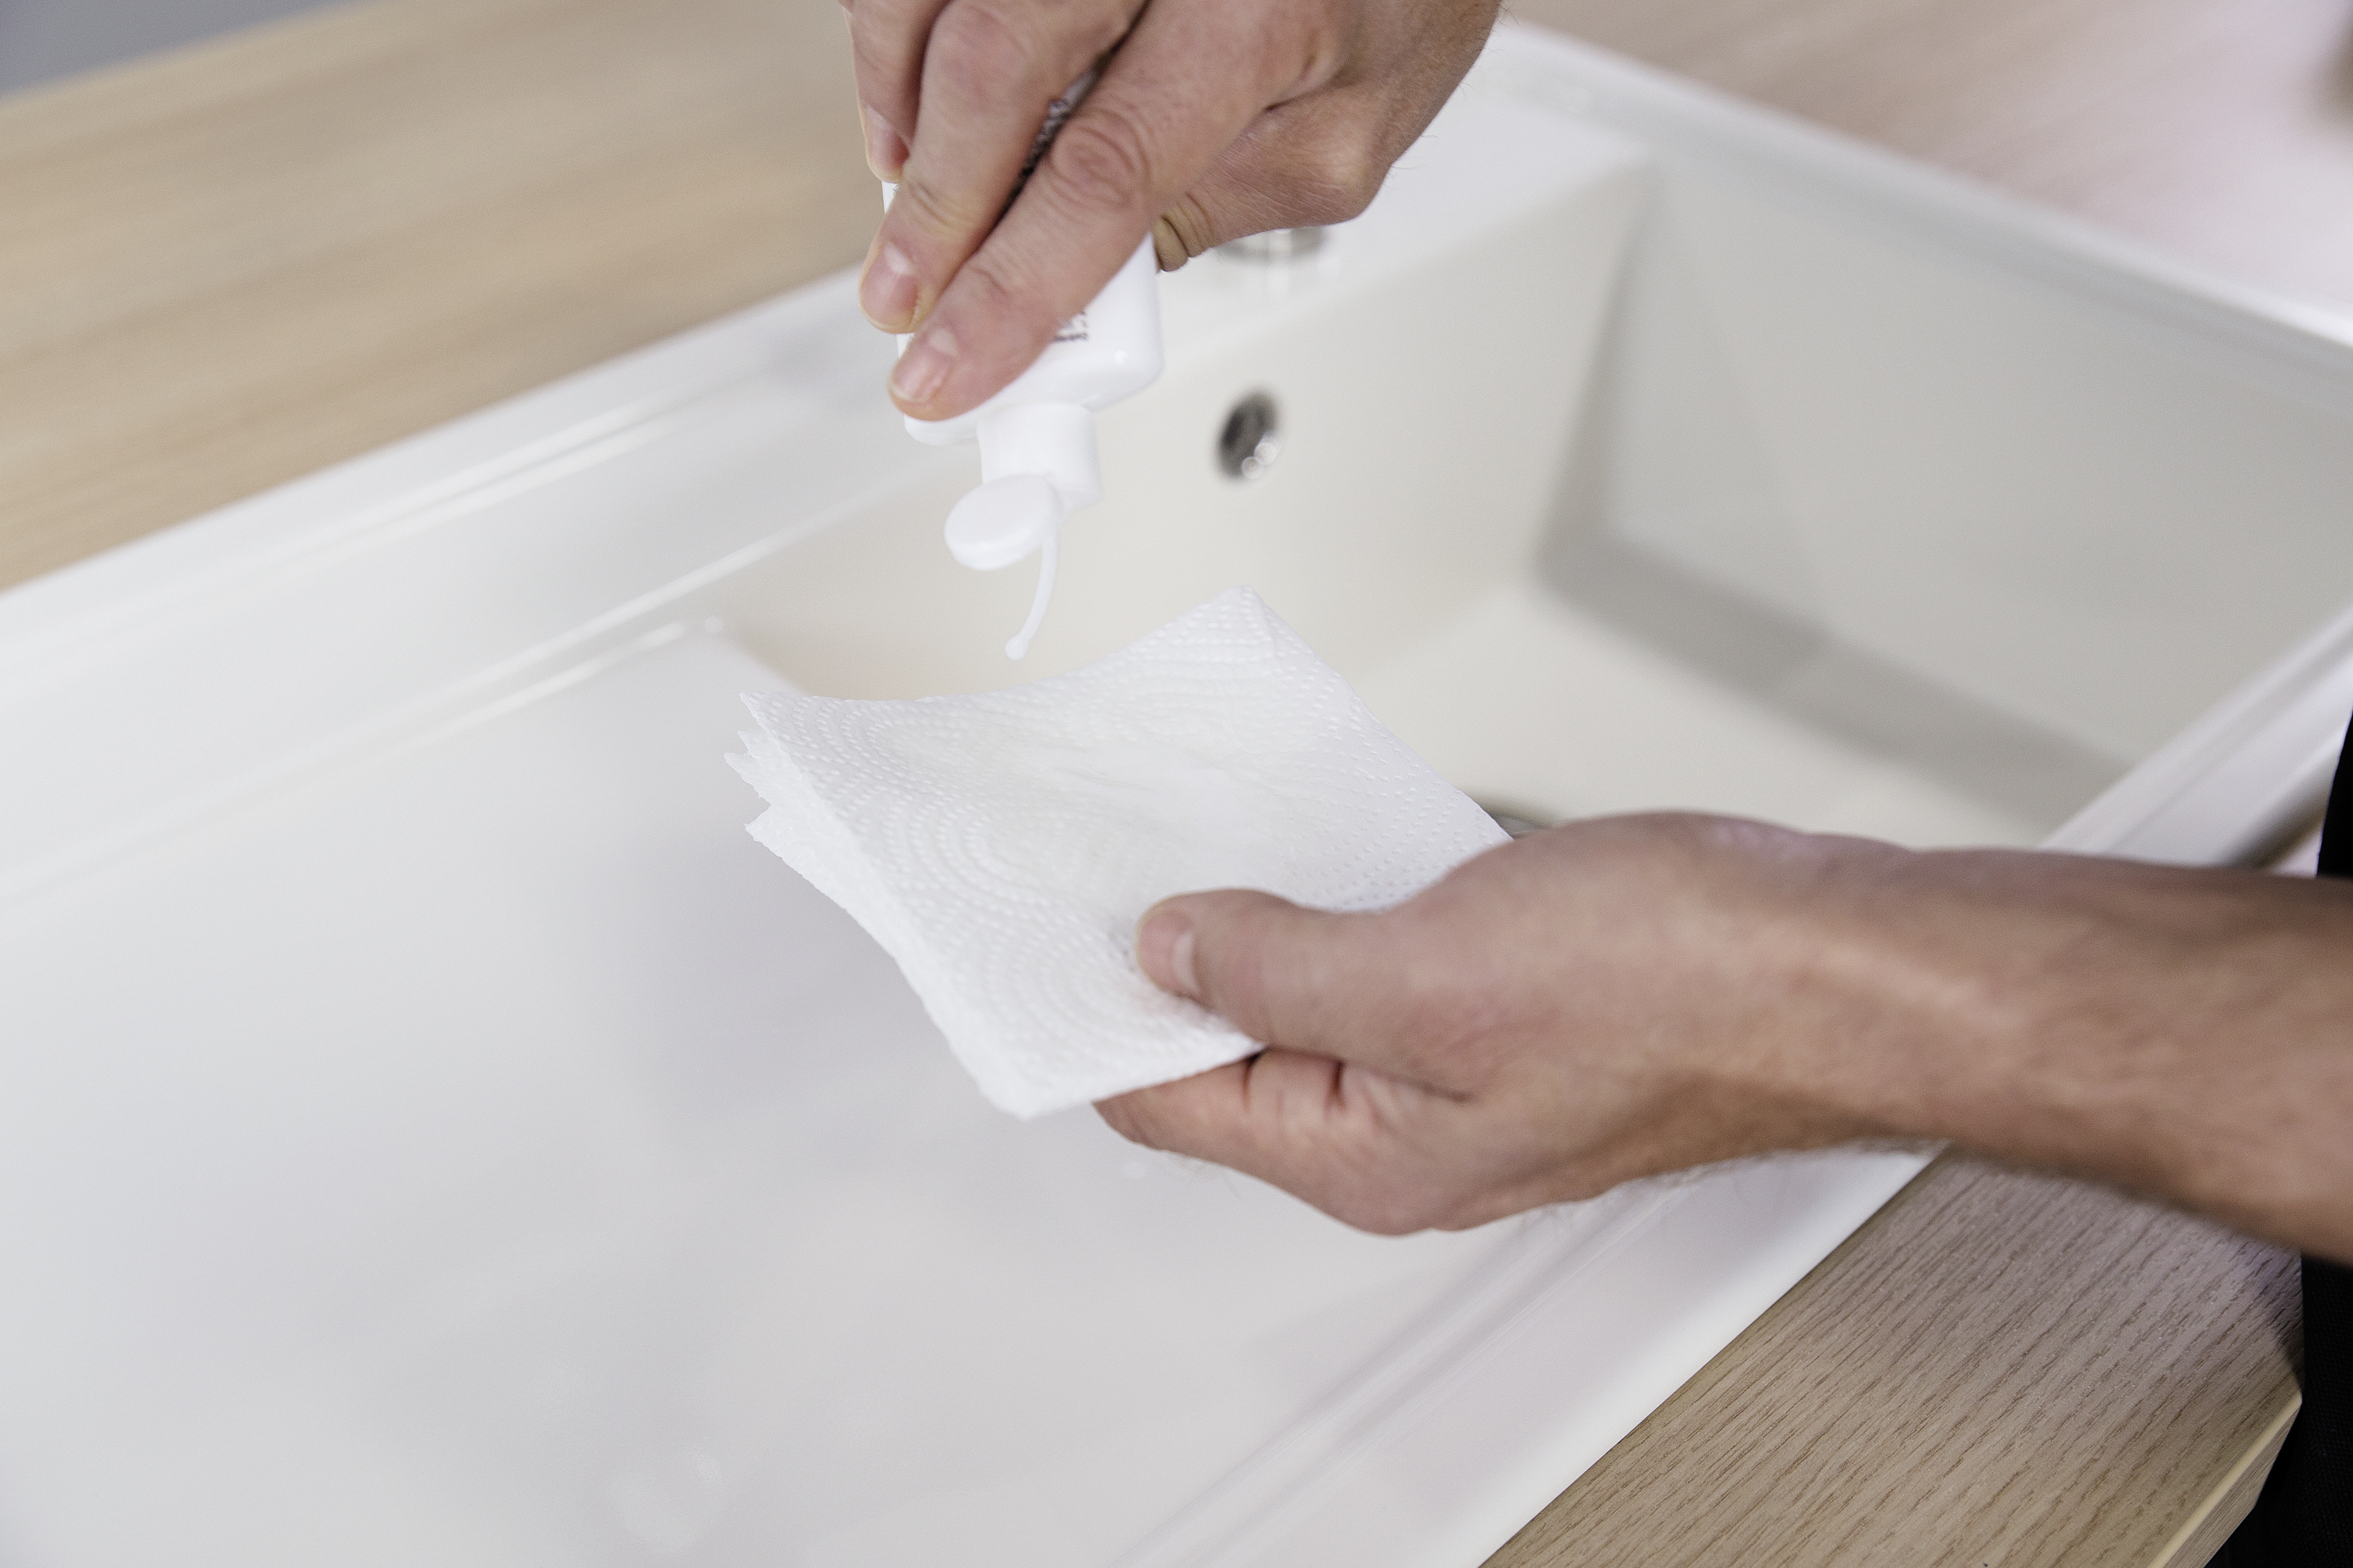 Shake the PuraPlus liquid and squeeze a little of the cleaning fluid onto a paper towel.